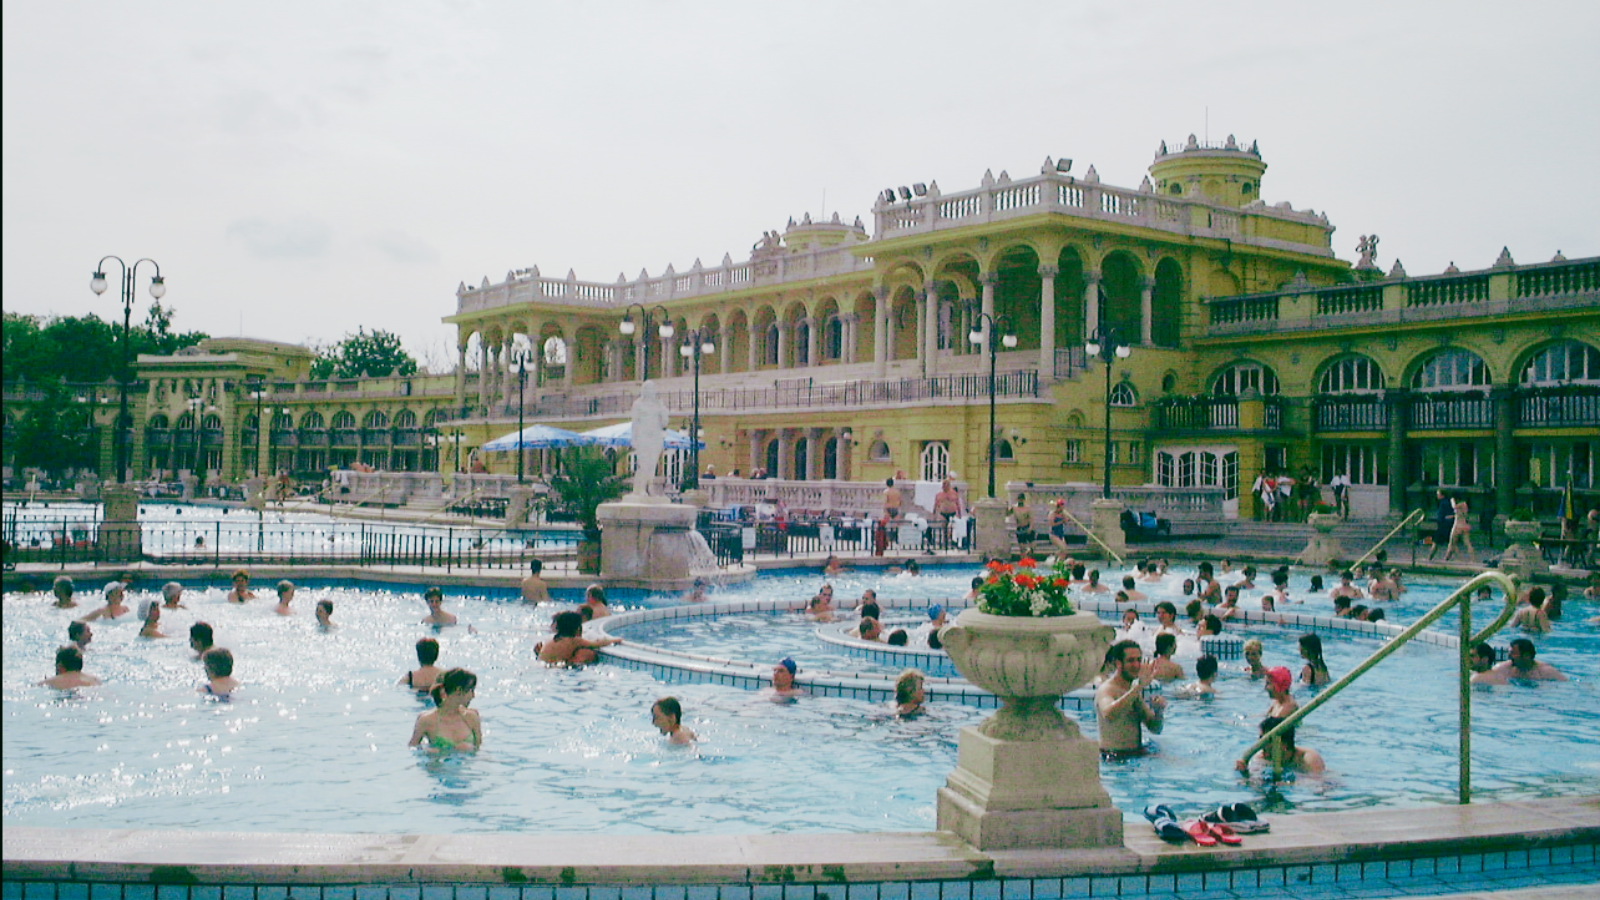 Széchenyi Baths - bus rental in Budapest for 1 day